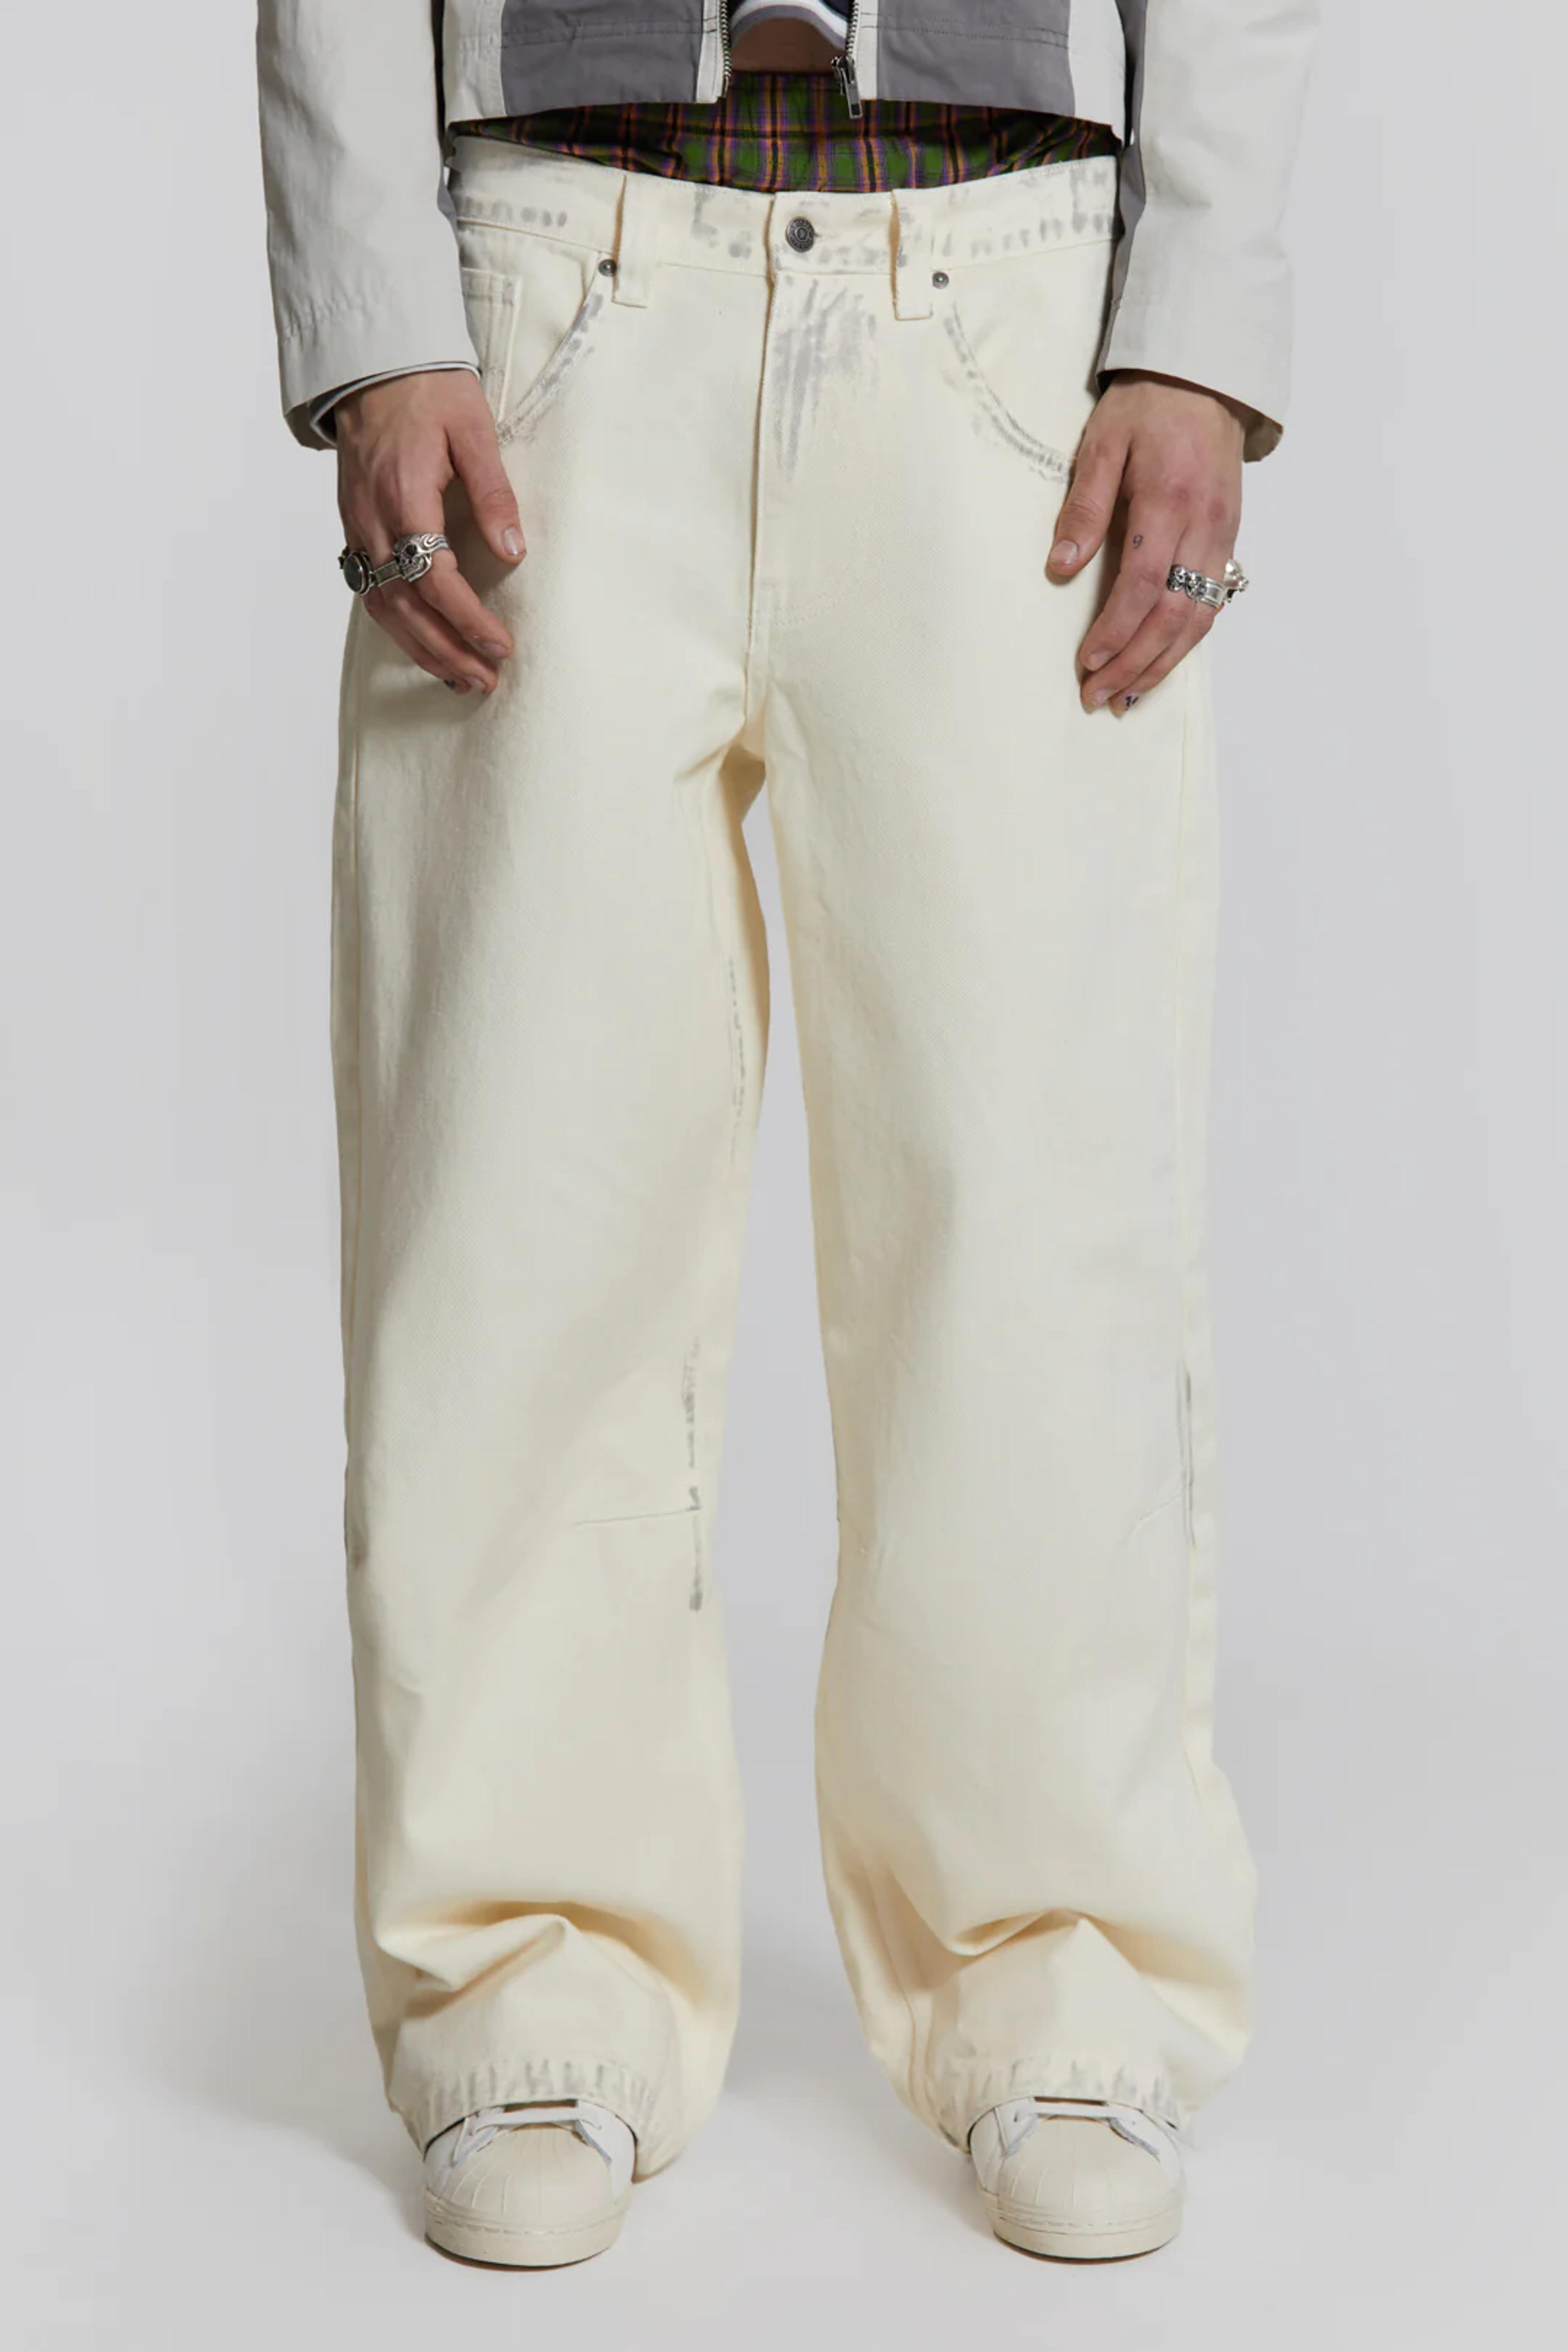 Dirty White Colossus Jeans | Jaded London